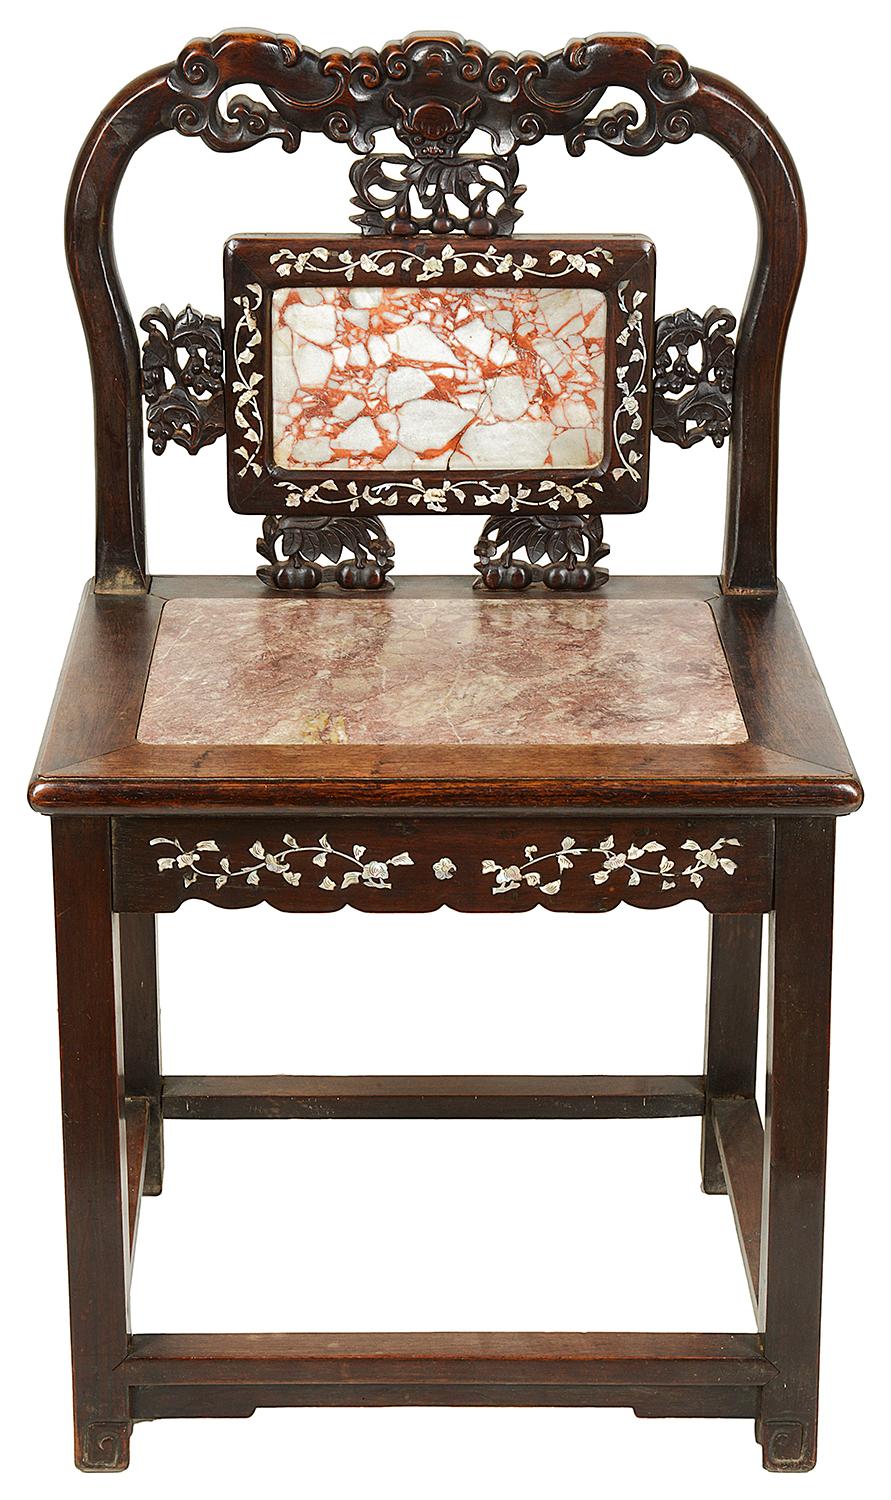 A good quality pair of 19th century Chinese hardwood side chairs, each with inlaid mother-of-pearl, carved bats above cherries and leaves with an inset marble to the back and seats. Raised on square section legs, united by stretchers.